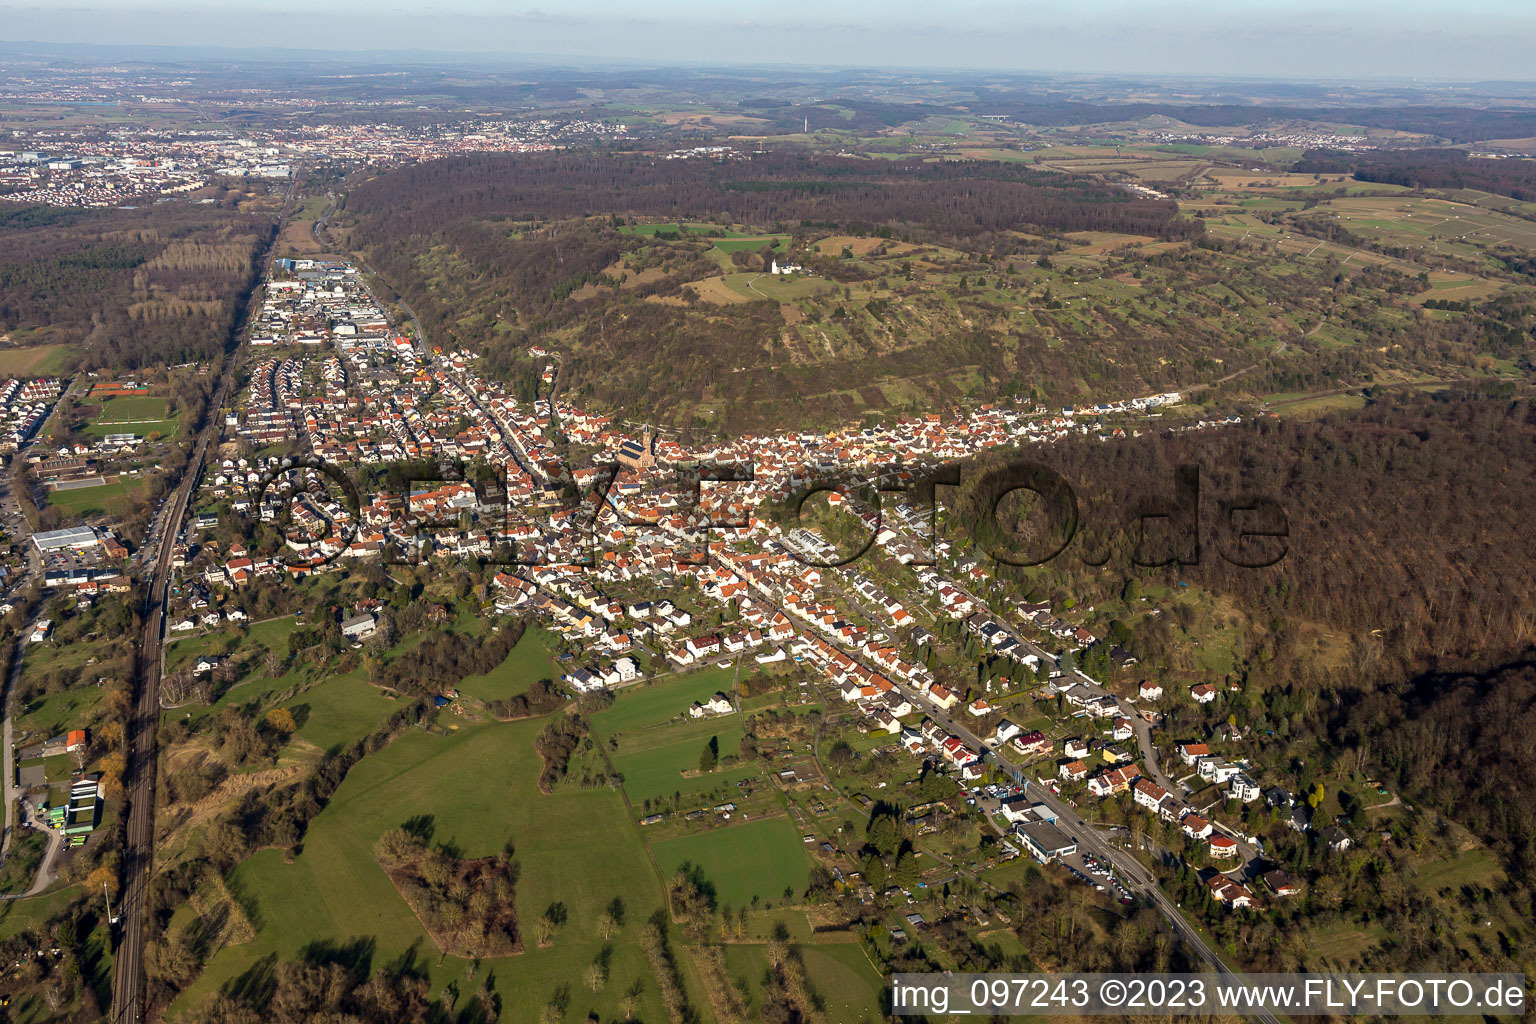 From the south in the district Untergrombach in Bruchsal in the state Baden-Wuerttemberg, Germany